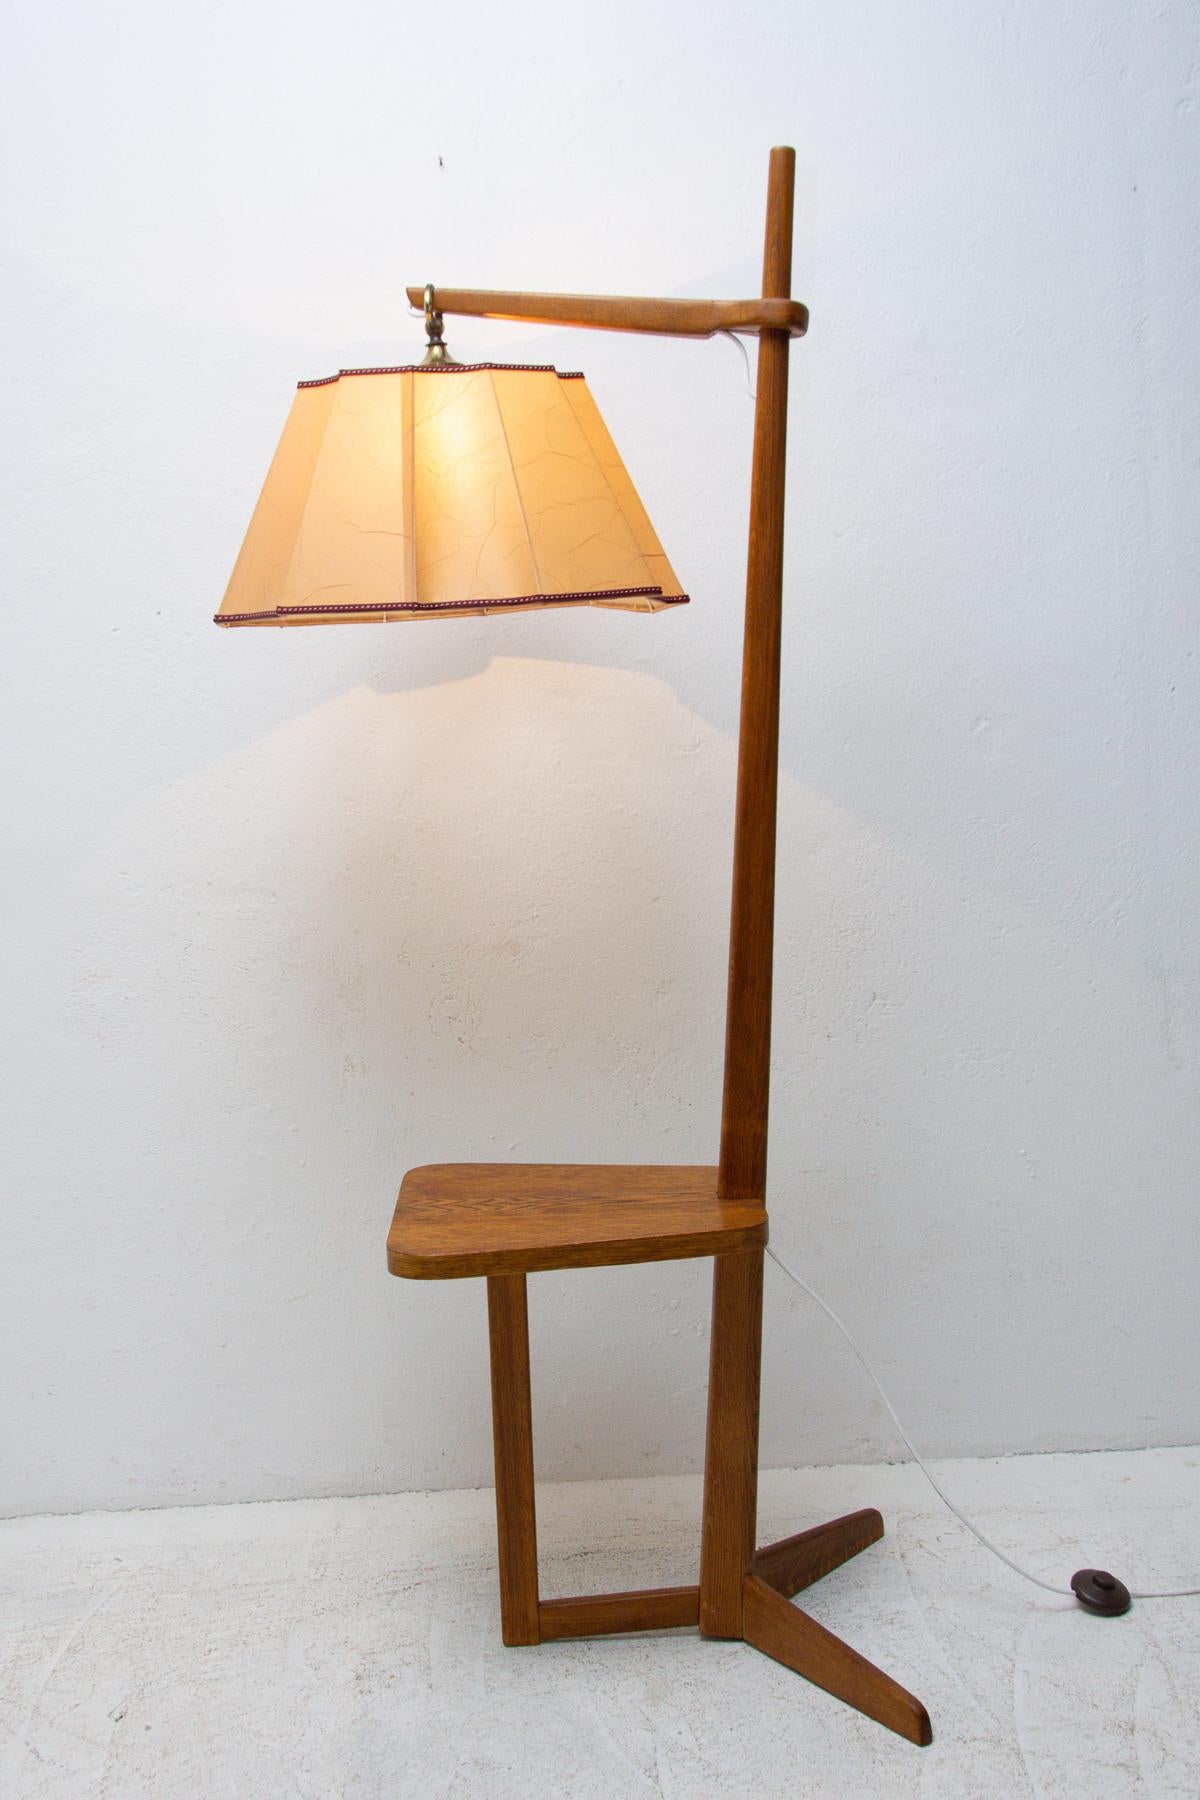 Mid century wooden floor lamp in oak with restored lampshade.
Made in the 50´s in the former Czechoslovakia, it was produced for “Krasna Jizba” company. In excellent condition, fullry restored, new wiring.

Lampshade height: 29 cm.